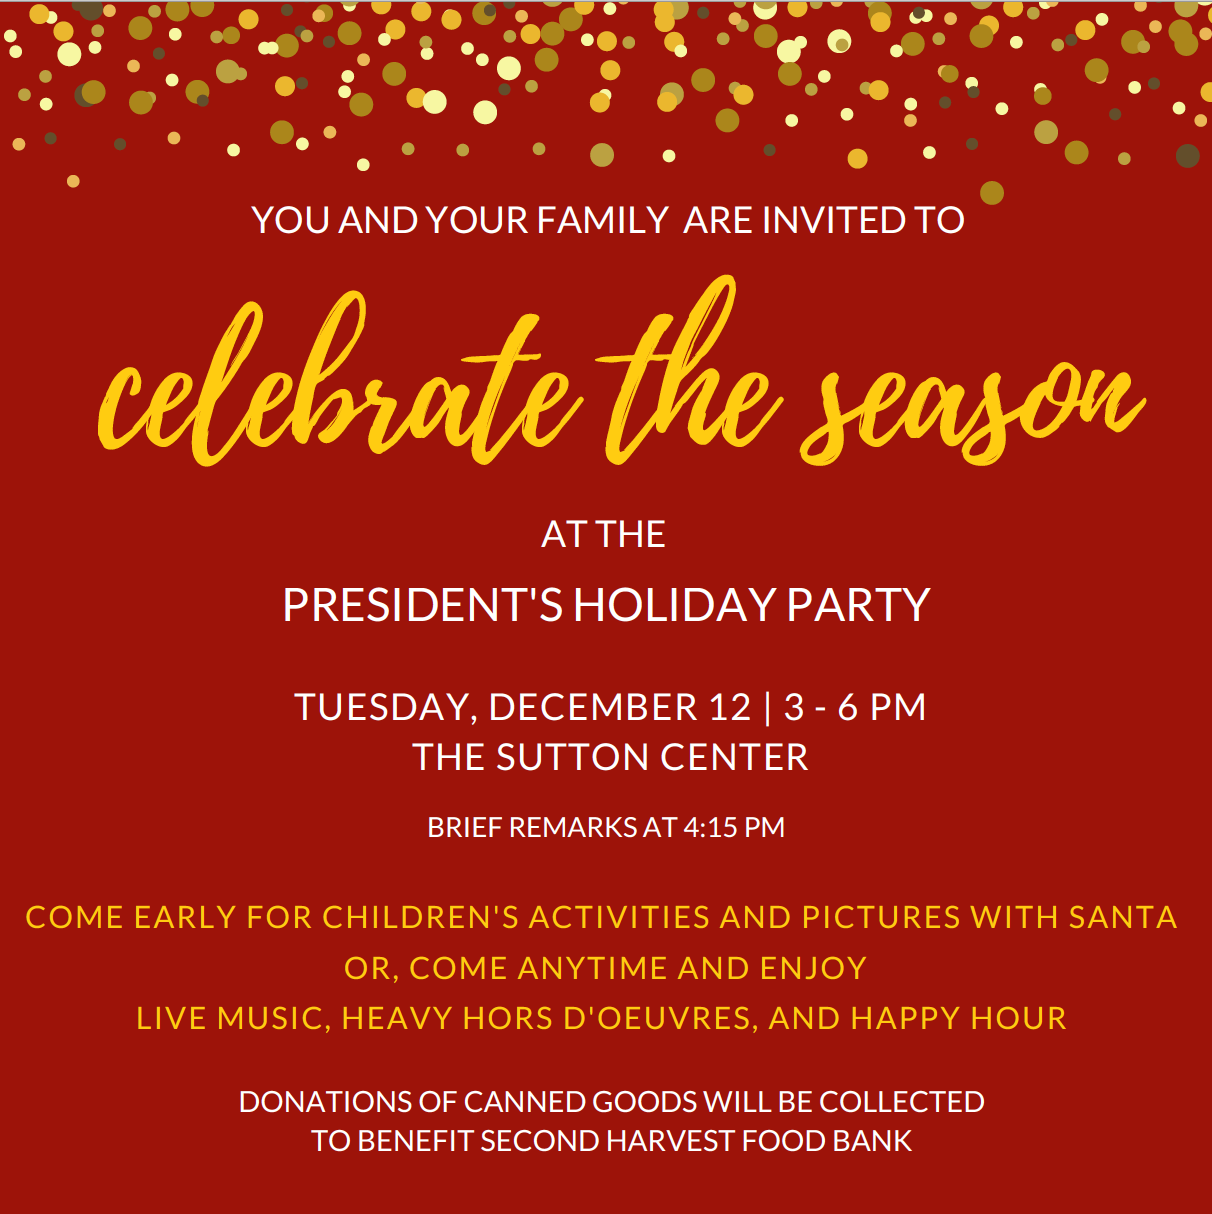 President's Holiday Party on Dec. 12 | Inside WFU - news for faculty ...